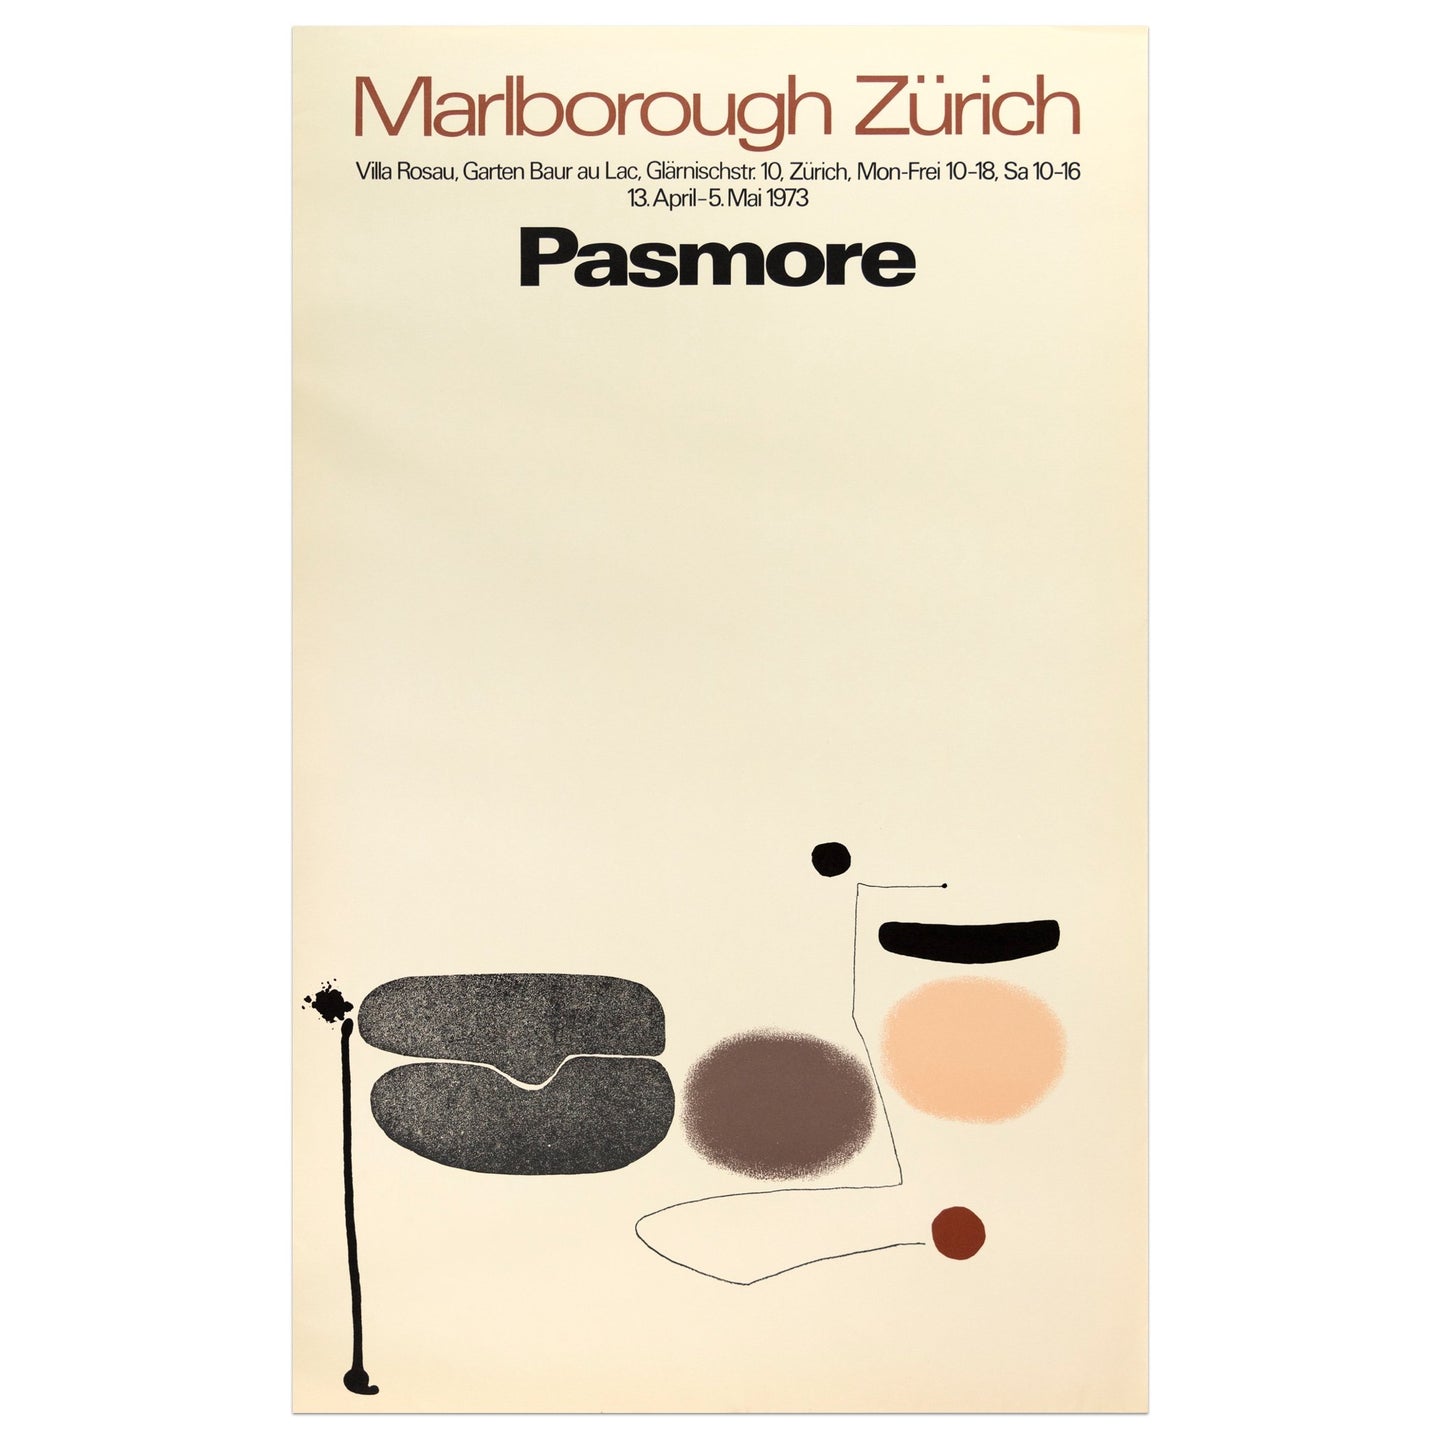 1973 Marlborough Zürich Victor Pasmore poster featuring a simple abstract composition of light and dark toned circular shapes and lines